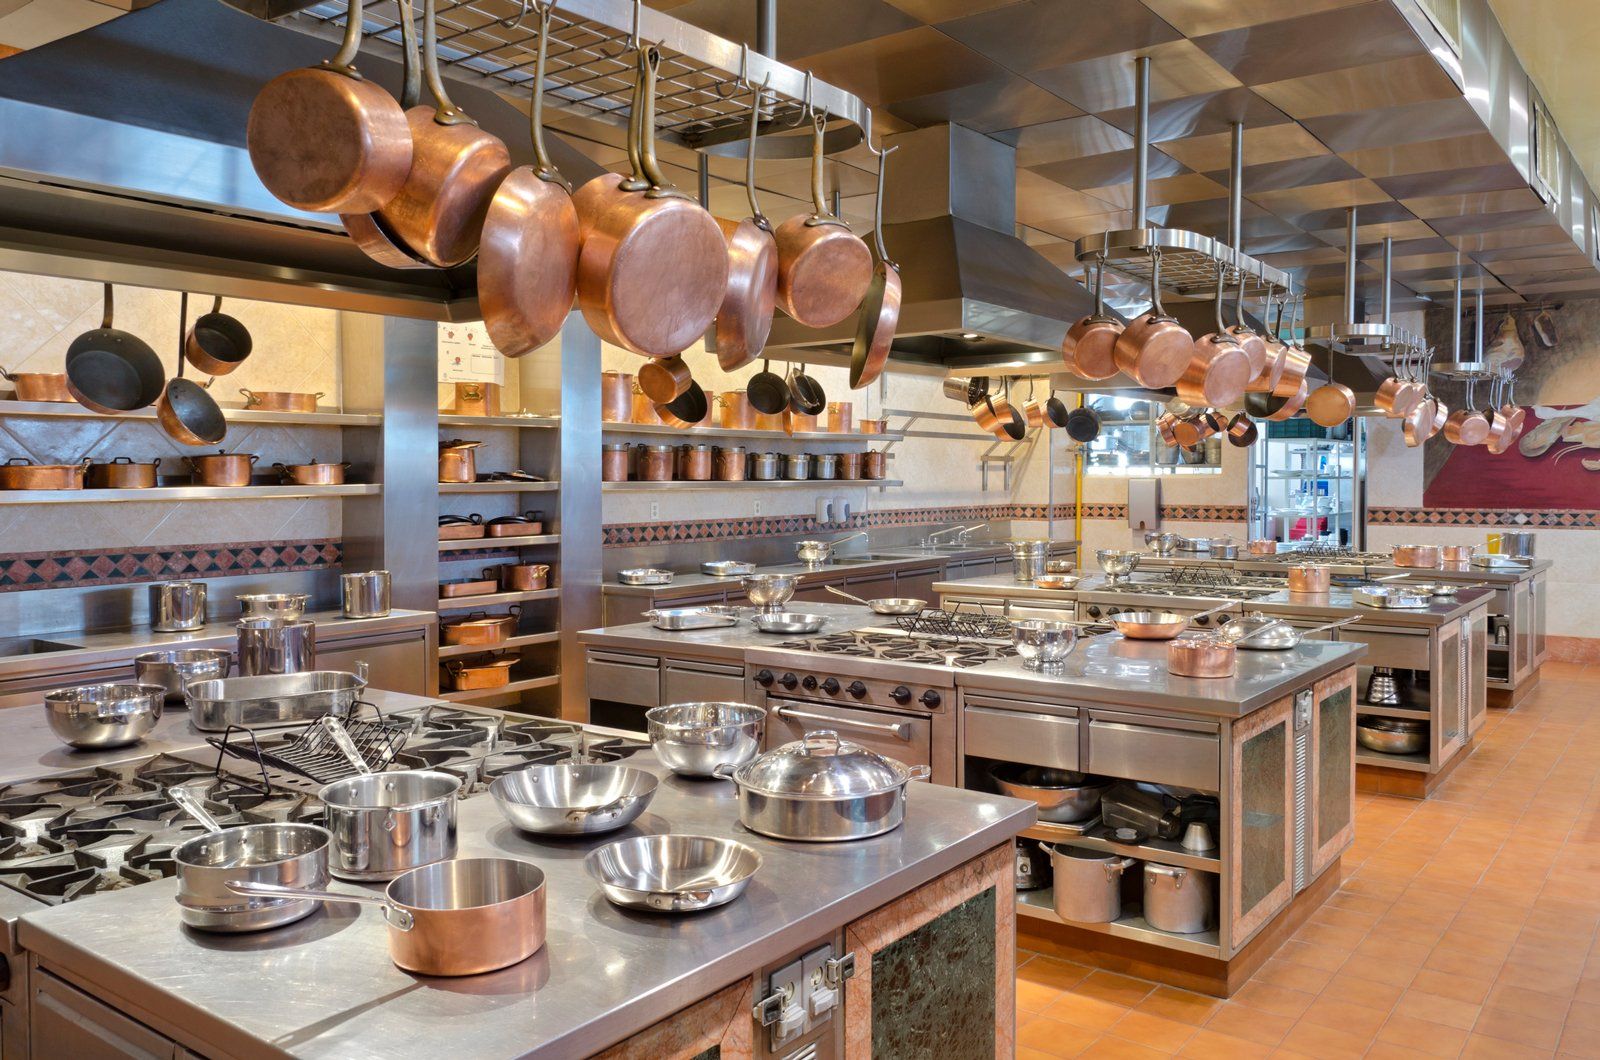 Commercial Kitchen & Restaurant Cleaning Services for Rhode Island